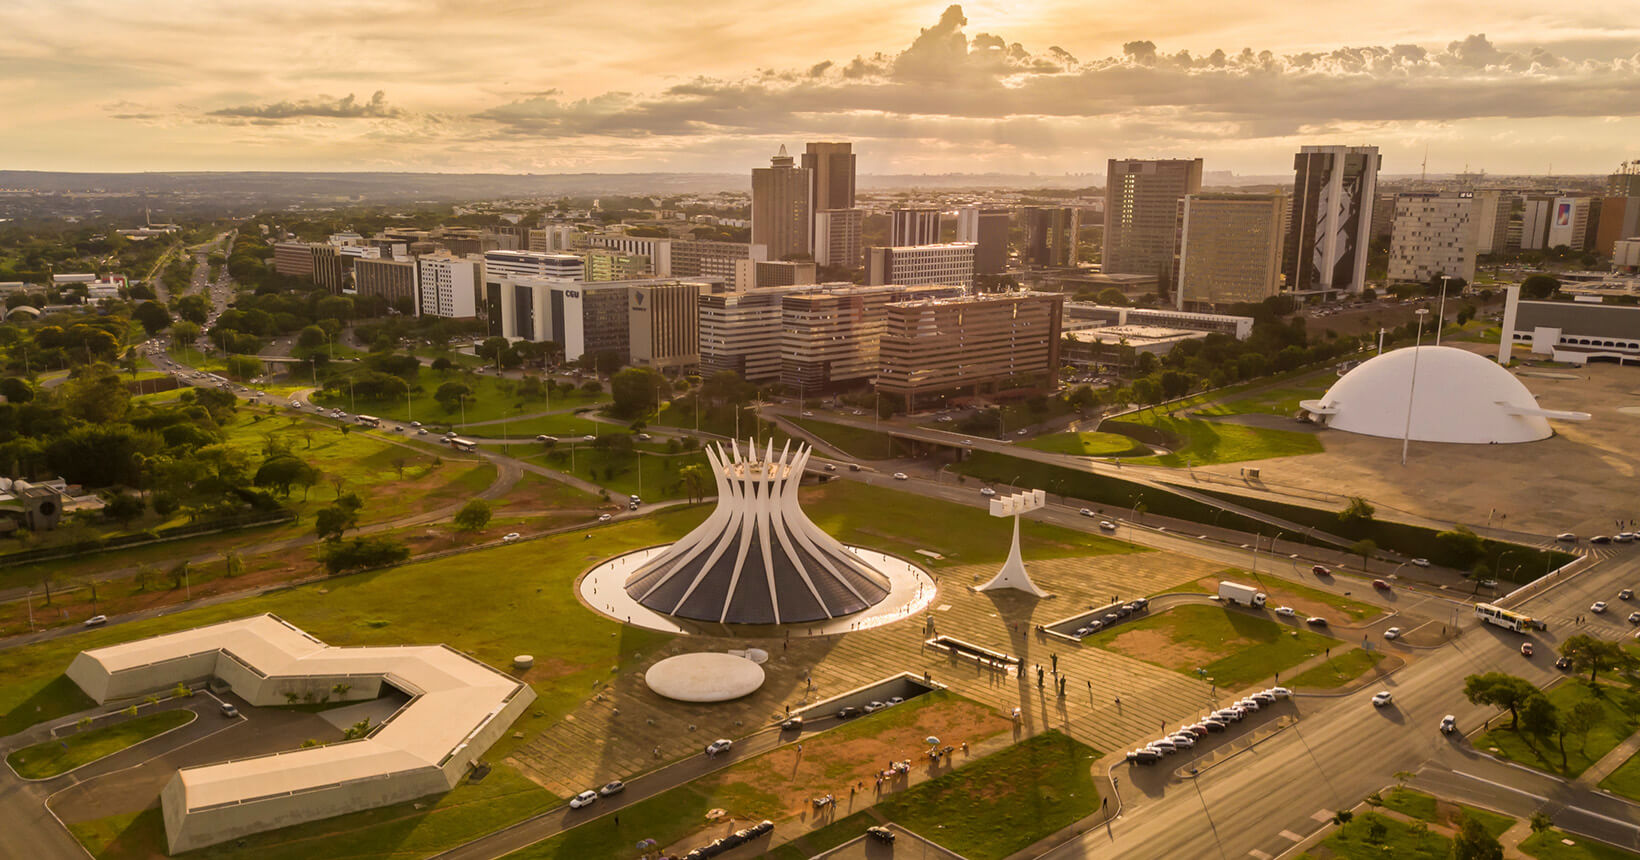 The Brazilian capital, Brasília, holds the fourth position in the top ten most Instagrammed UNESCO World Heritage Sites list.